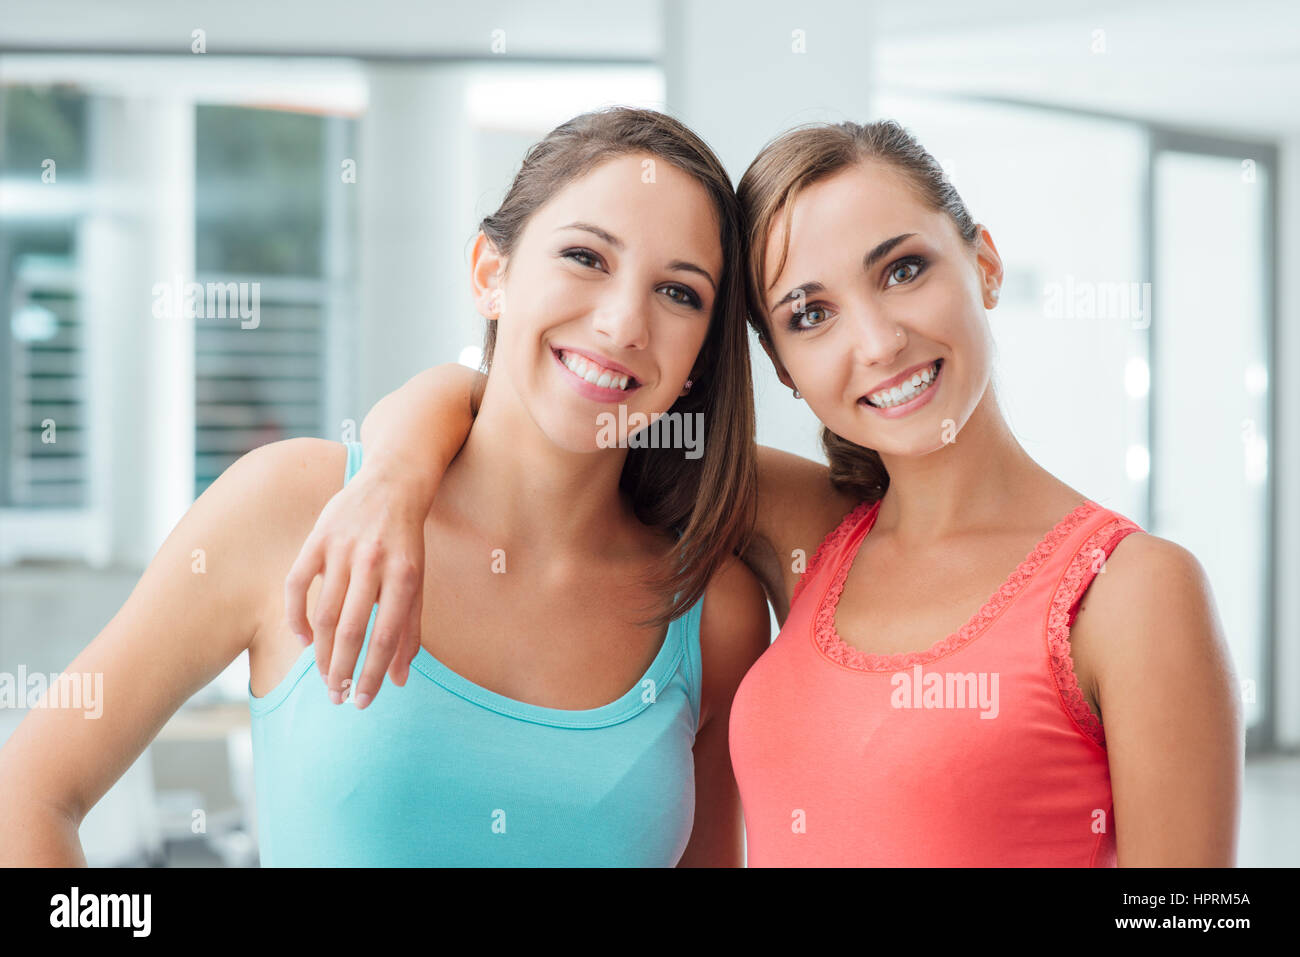 Cute smiling girls posing together and looking at camera, l'un est hugging her friend Banque D'Images